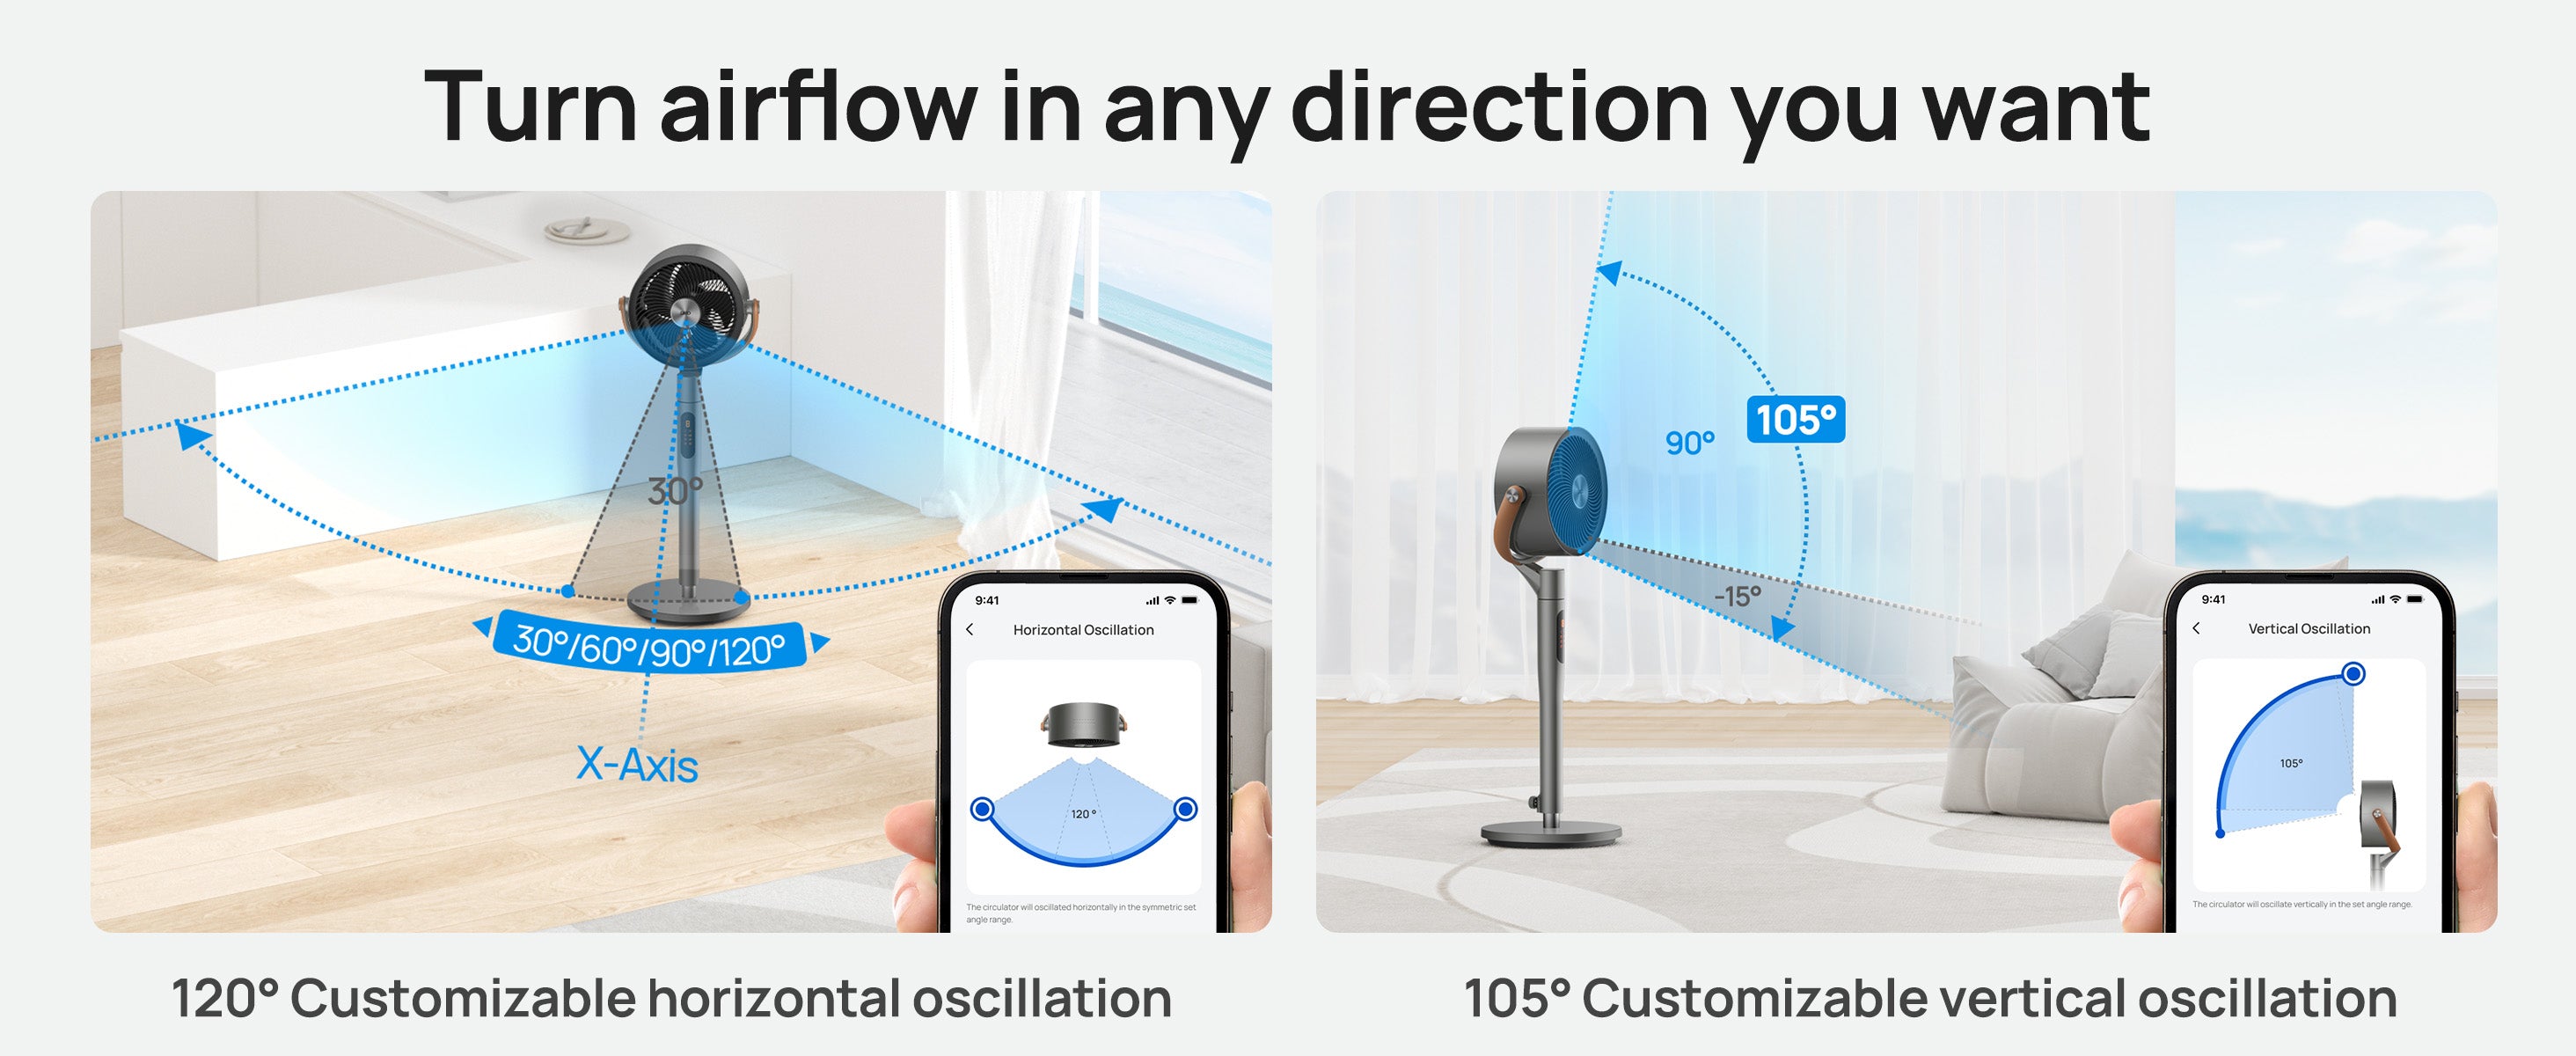 Turn airflow in any direction you want